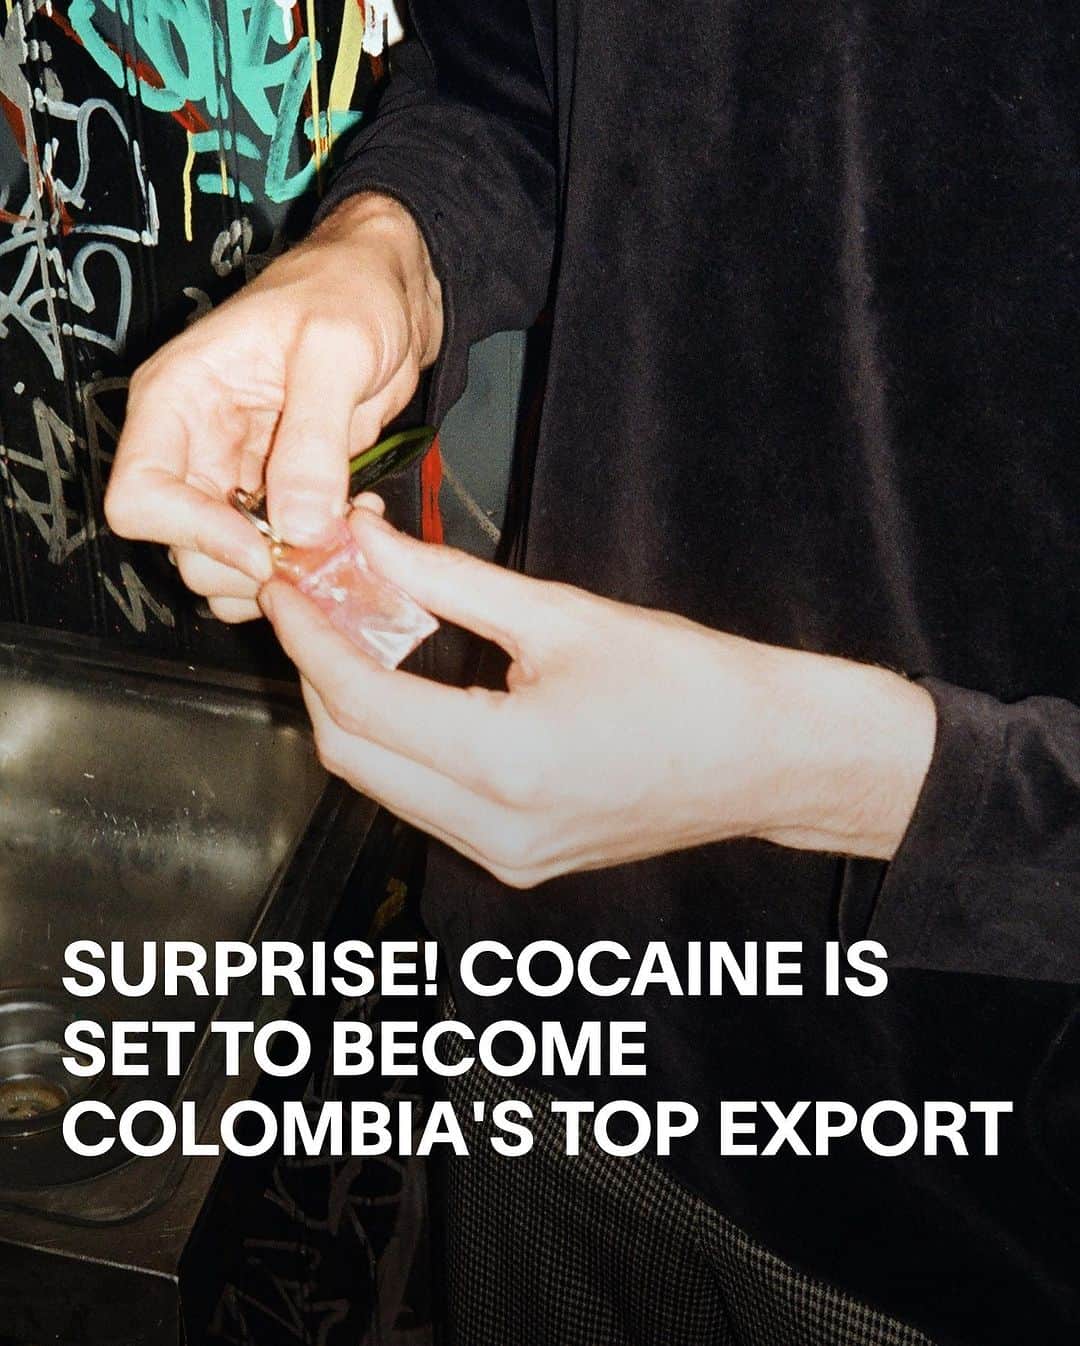 VICEのインスタグラム：「Given how much a bag will set you back, it's a little shocking that cocaine hasn't always been Colombia's most lucrative export – but it's about to be. This week, economists predicted that the drug will overtake oil as the country’s top export.   Why? Oil exports have dropped 30% in the first half of the year, while cocaine exports have consistently risen, according to 'Bloomberg' economist Felipe Hernandez. The Colombian government recently switched their drug war tactics – going after drug traffickers rather than coca farmers – but “that hasn’t prevented production from expanding”, said Hernandez.  On Friday, Colombia’s President Gustavo Petro said cocaine had always been a top export for his country. “Cocaine has been Colombia’s first export product several times, and if not, the second," he wrote on X (formerly Twitter). "The sad reality of oil economies that neglect that production, and not extraction, is the source of wealth. We want a productive Colombia."」